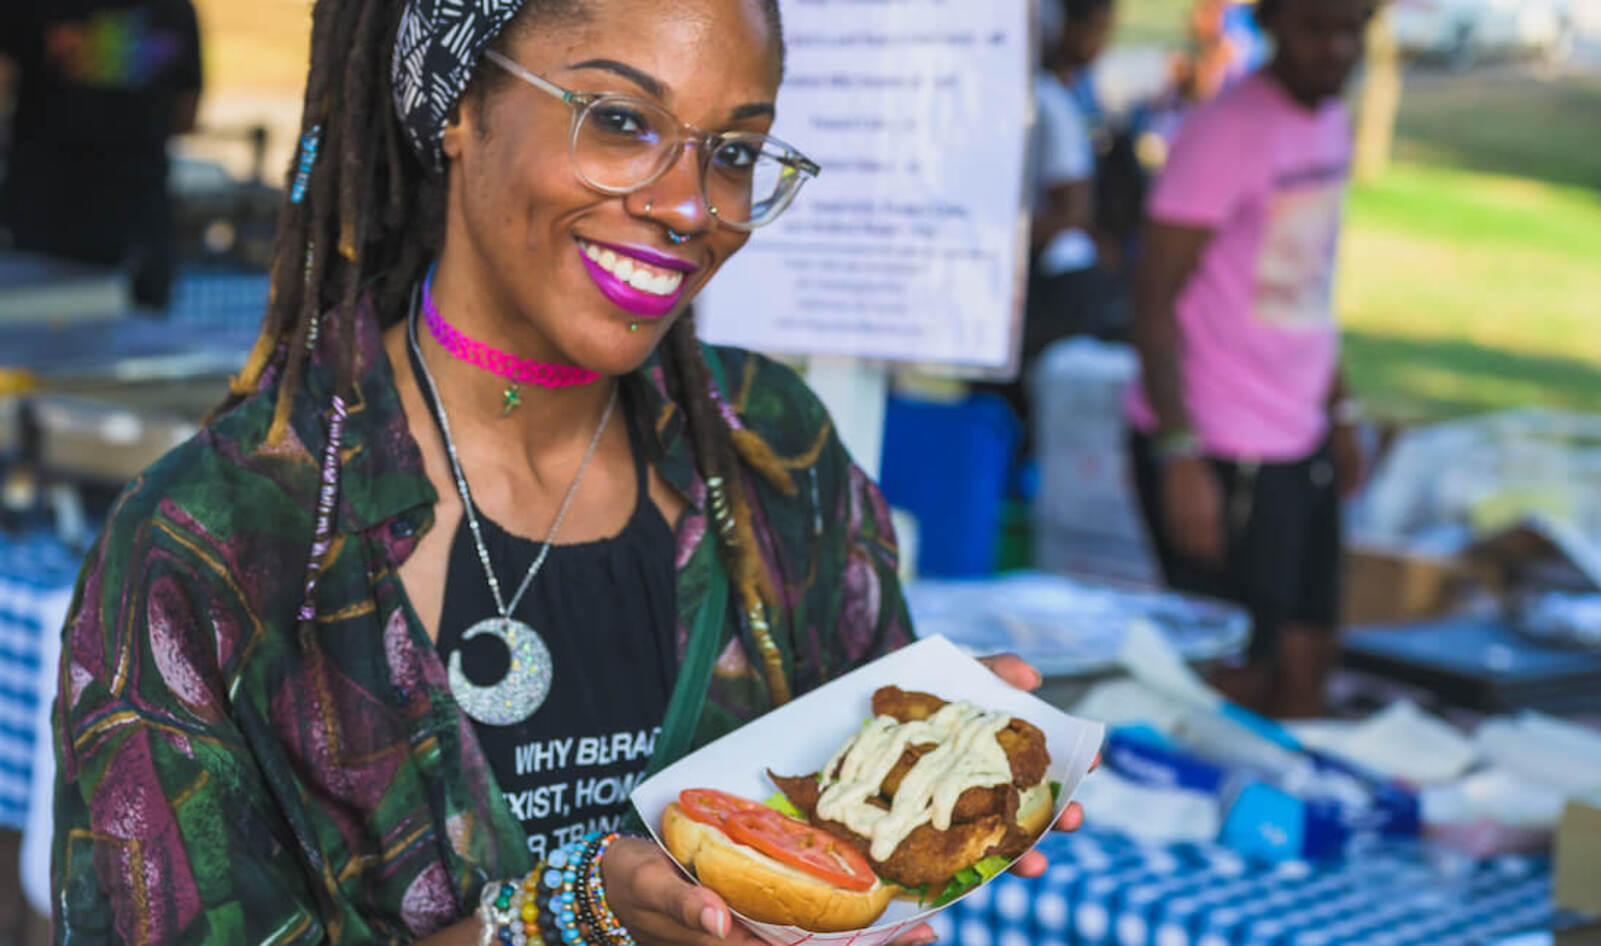 New 3-Day Festival Celebrates Black Leaders, Businesses, and Orgs with Vegan Food